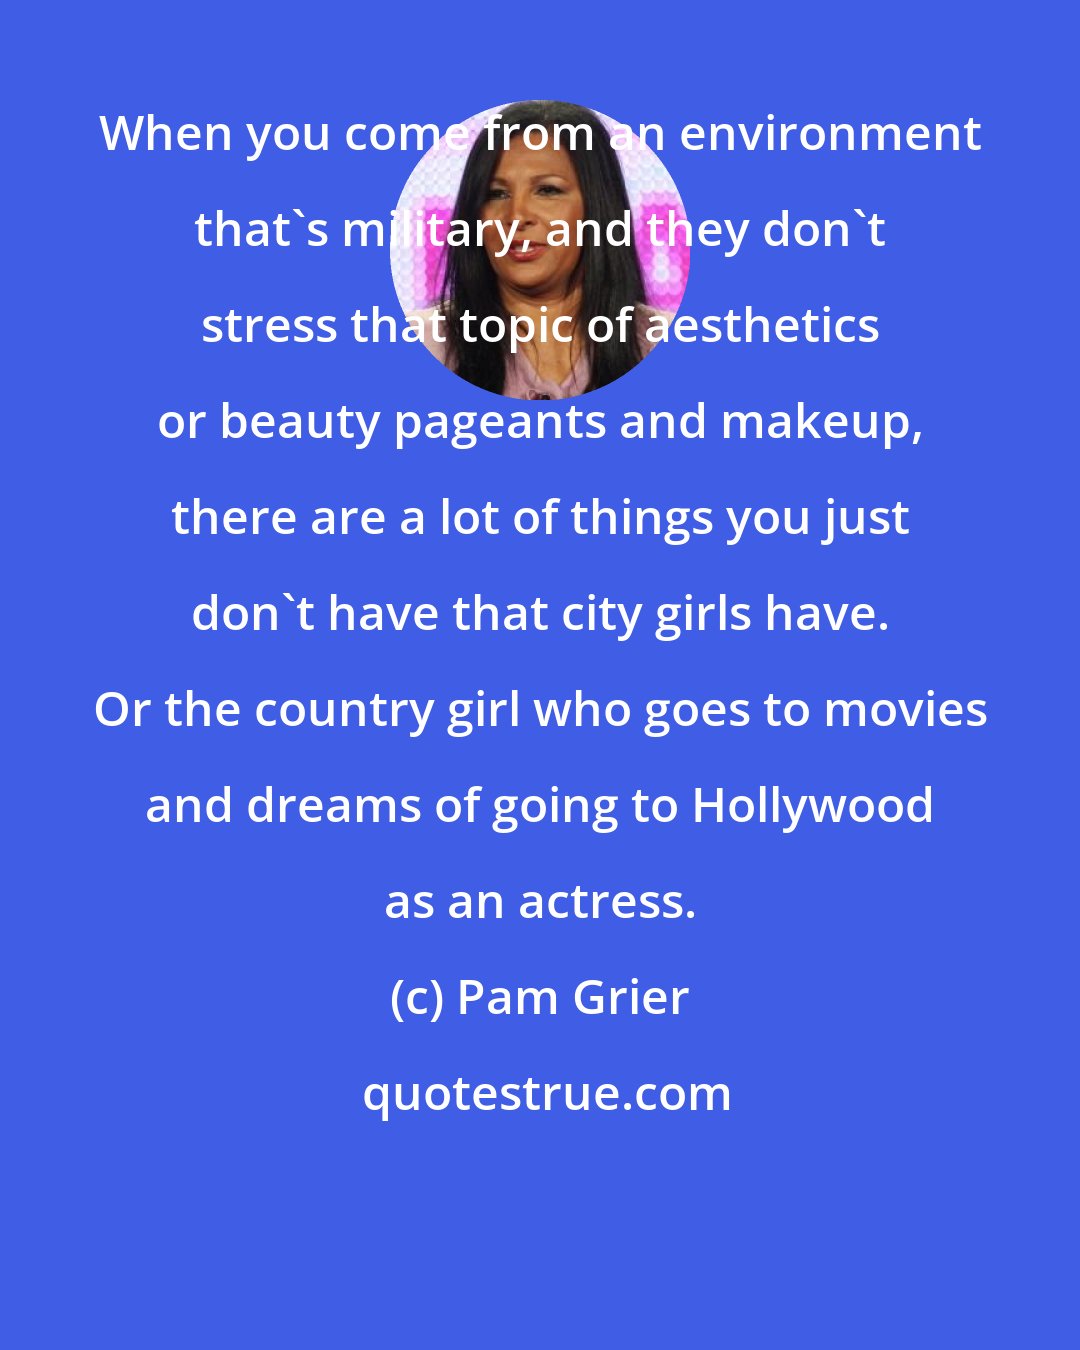 Pam Grier: When you come from an environment that's military, and they don't stress that topic of aesthetics or beauty pageants and makeup, there are a lot of things you just don't have that city girls have. Or the country girl who goes to movies and dreams of going to Hollywood as an actress.